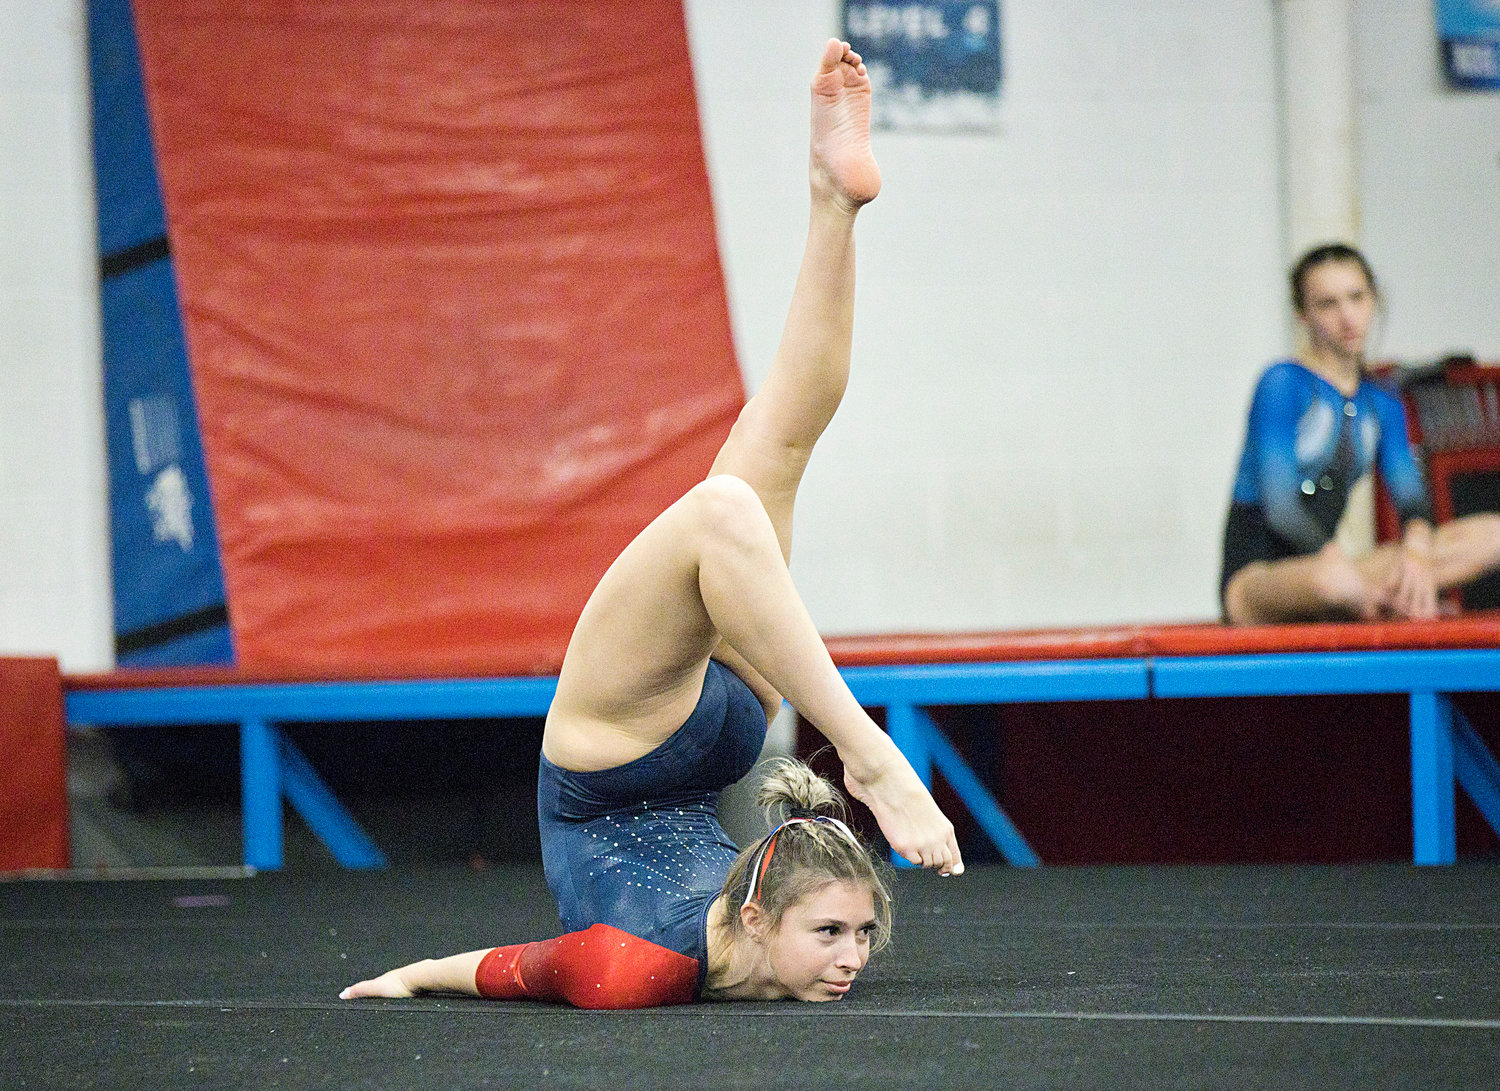 Portsmouth High’s Sierra Bonoff contorts herself while delivering her floor routine at Saturday’s gymnastics meet against Middletown, Mt. Hope, and Rogers/East Providence. She earned a 7.9 for the event.